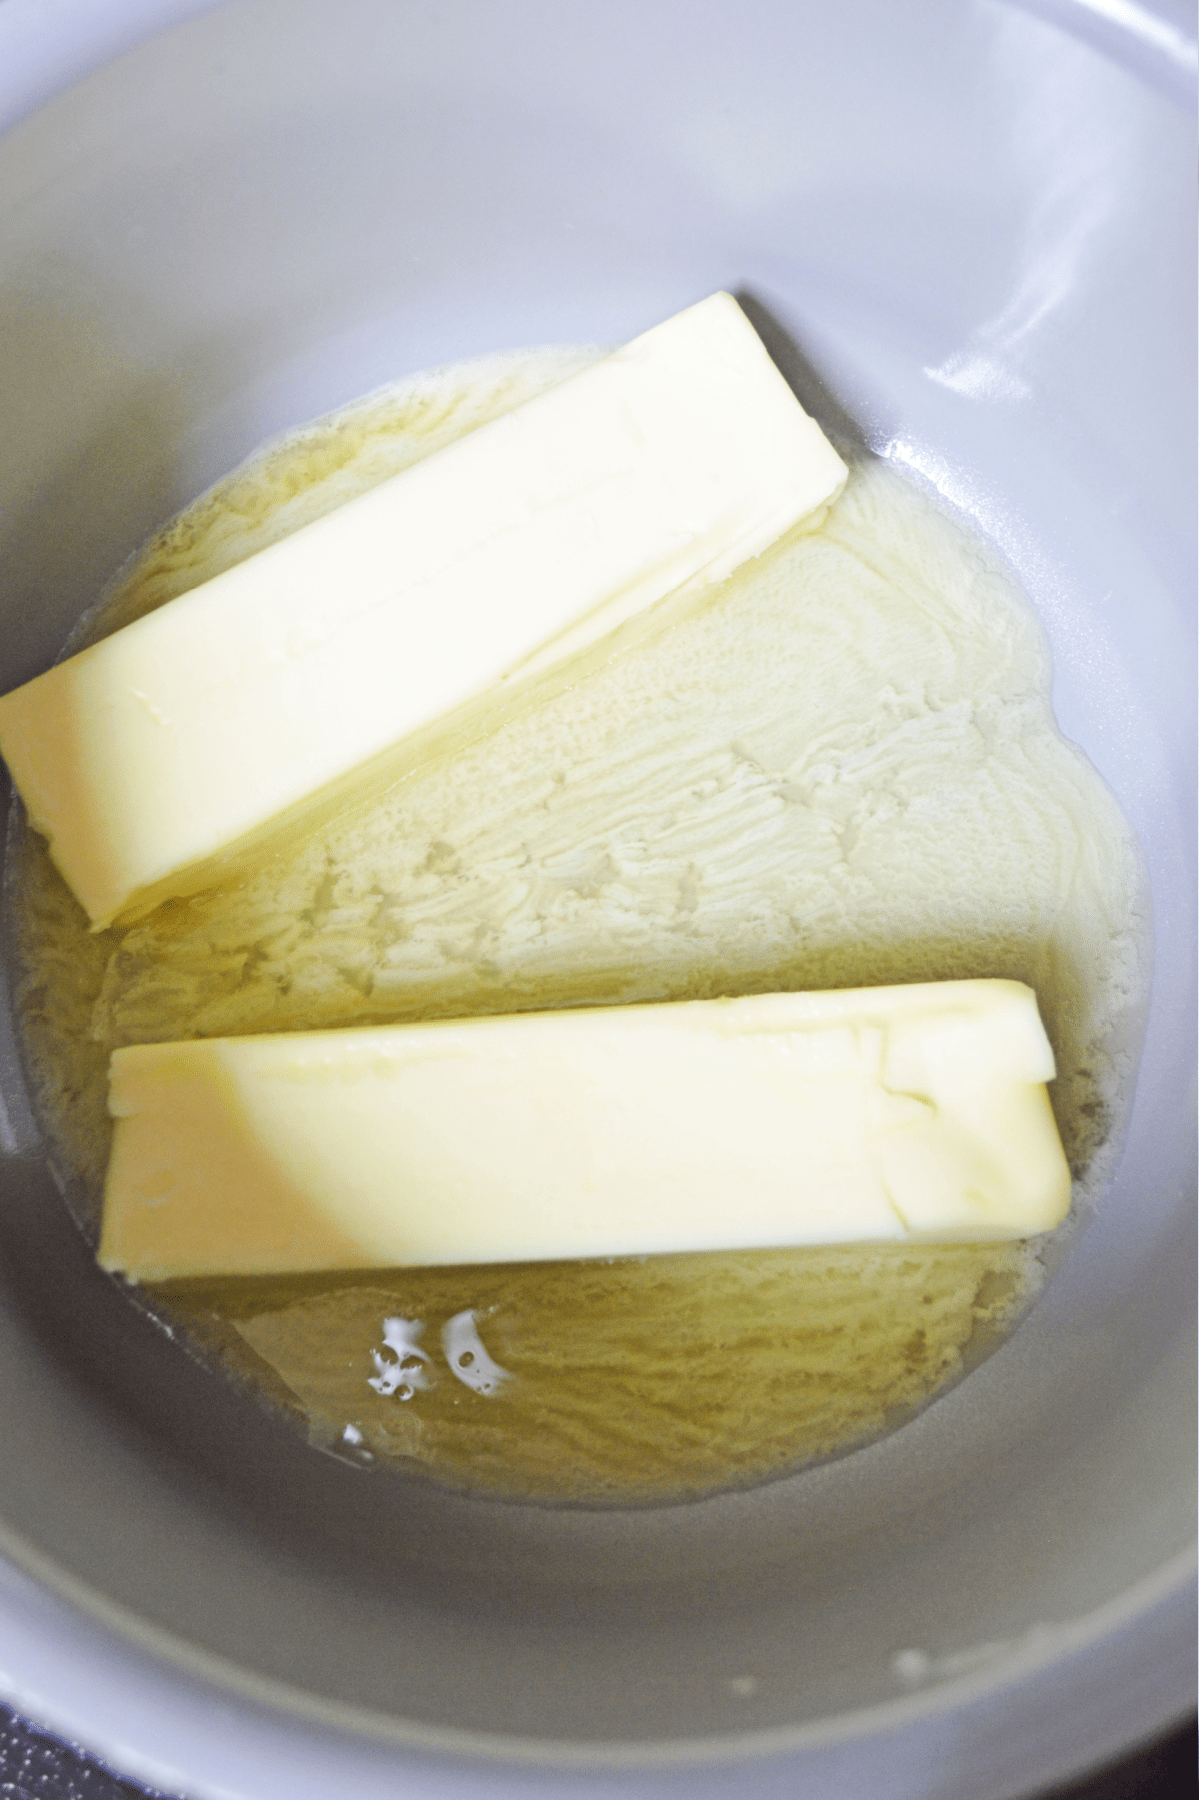 Butter in bowl slightly melted